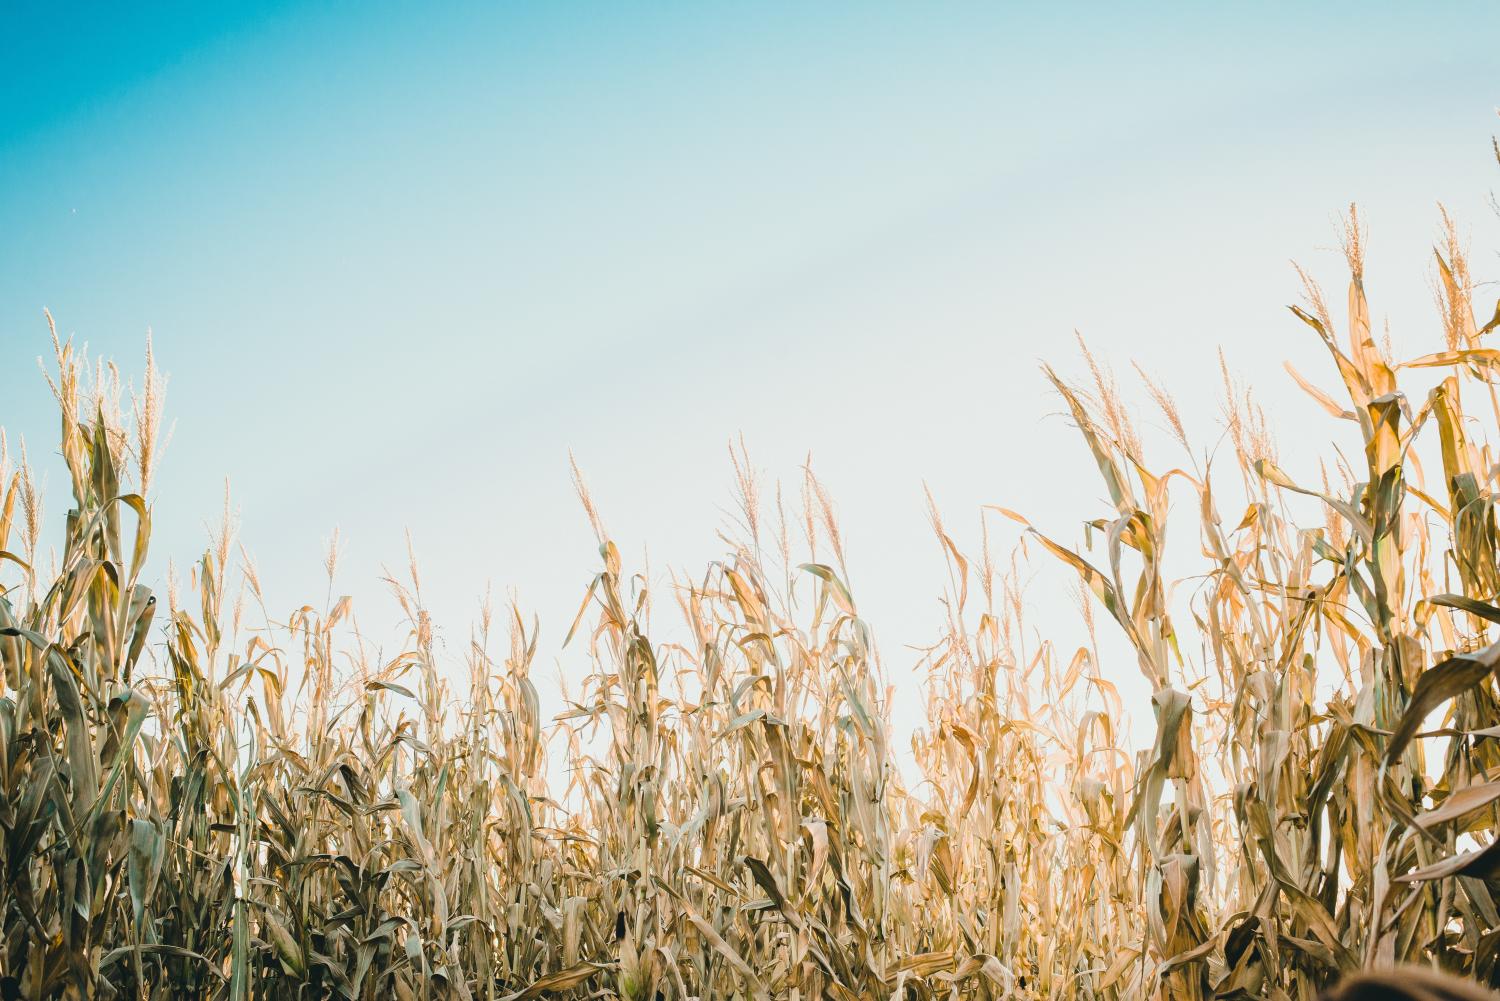 Americans are probably more familiar with genetically modified crops and foods than they realize, yet biotech companies have a long road ahead to overcome consumers' skepticism of this technology.